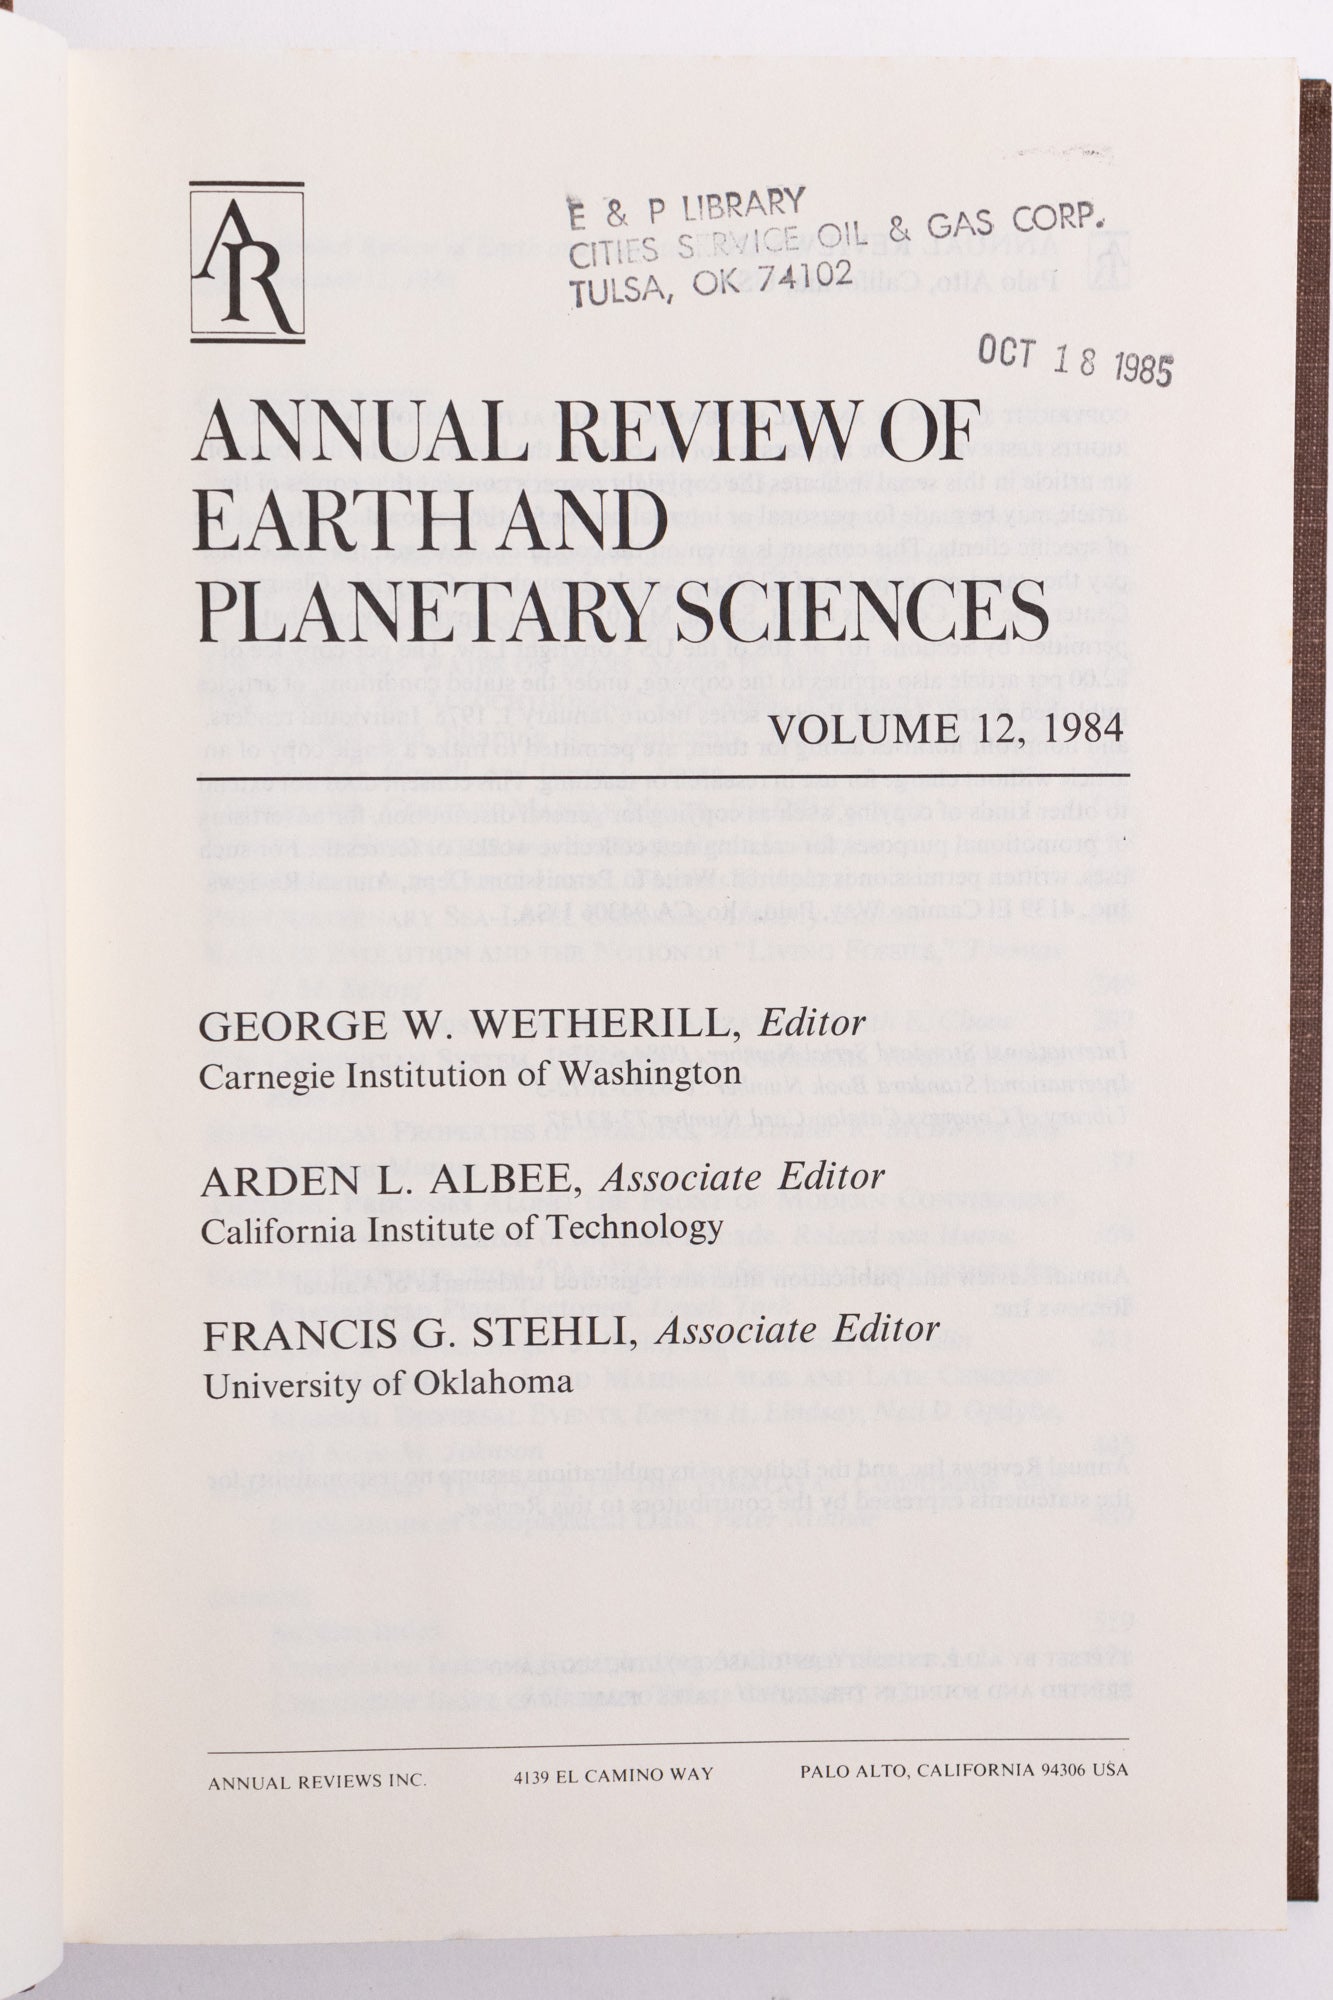 Annual Review of Earth and Planetary Sciences: Vol 12 - Stemcell Science Shop